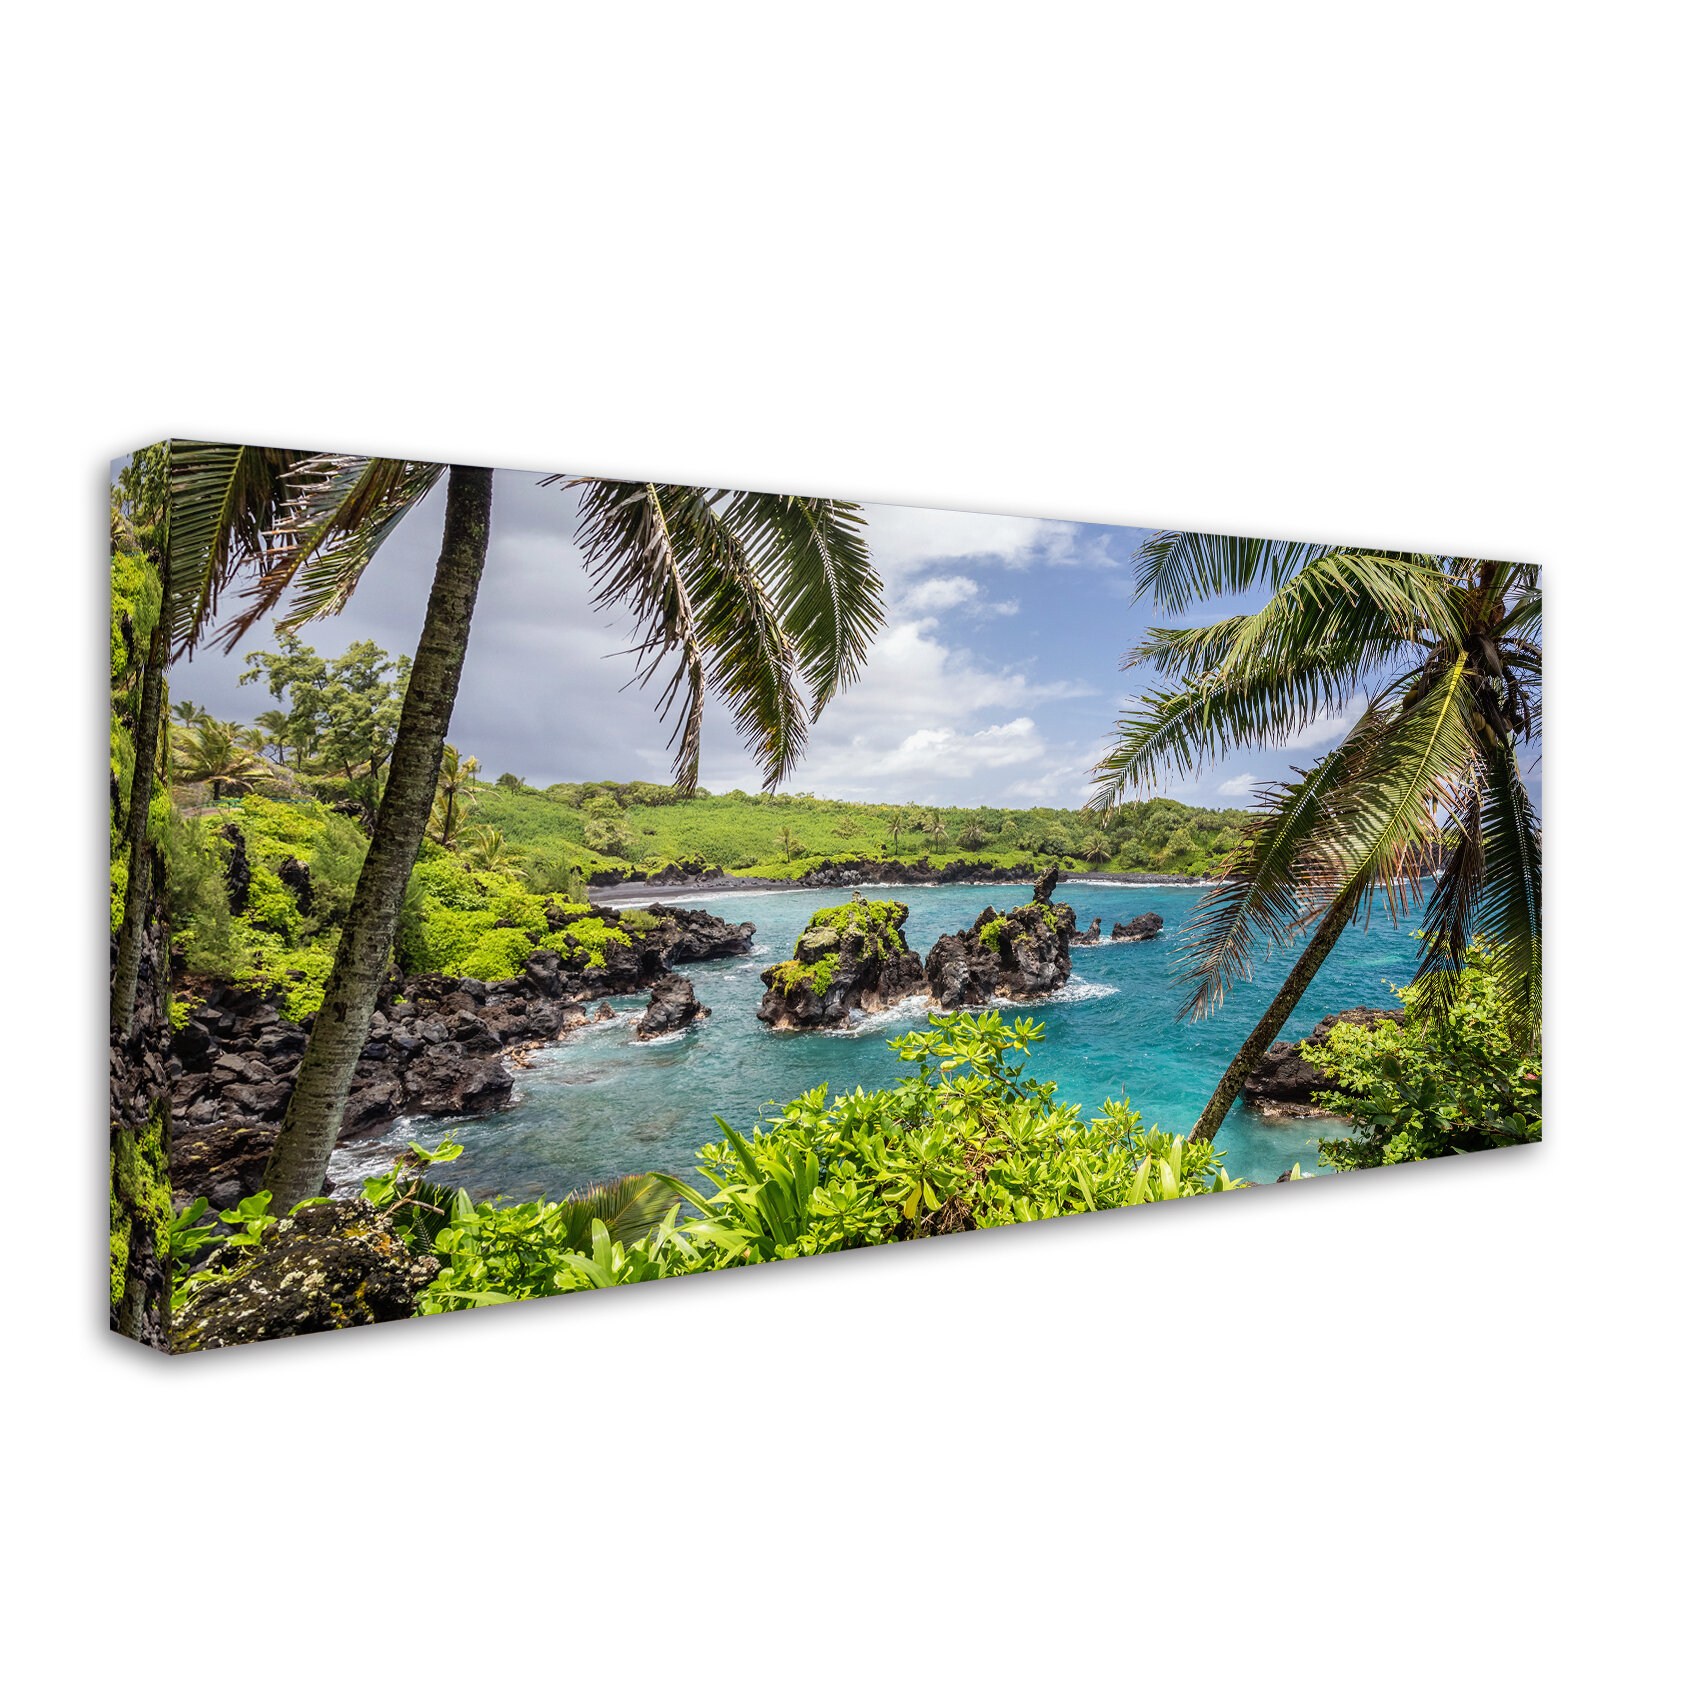 Trademark Art Tropical Paradise Maui By Pierre Leclerc Photographic Print On Wrapped Canvas Wayfair